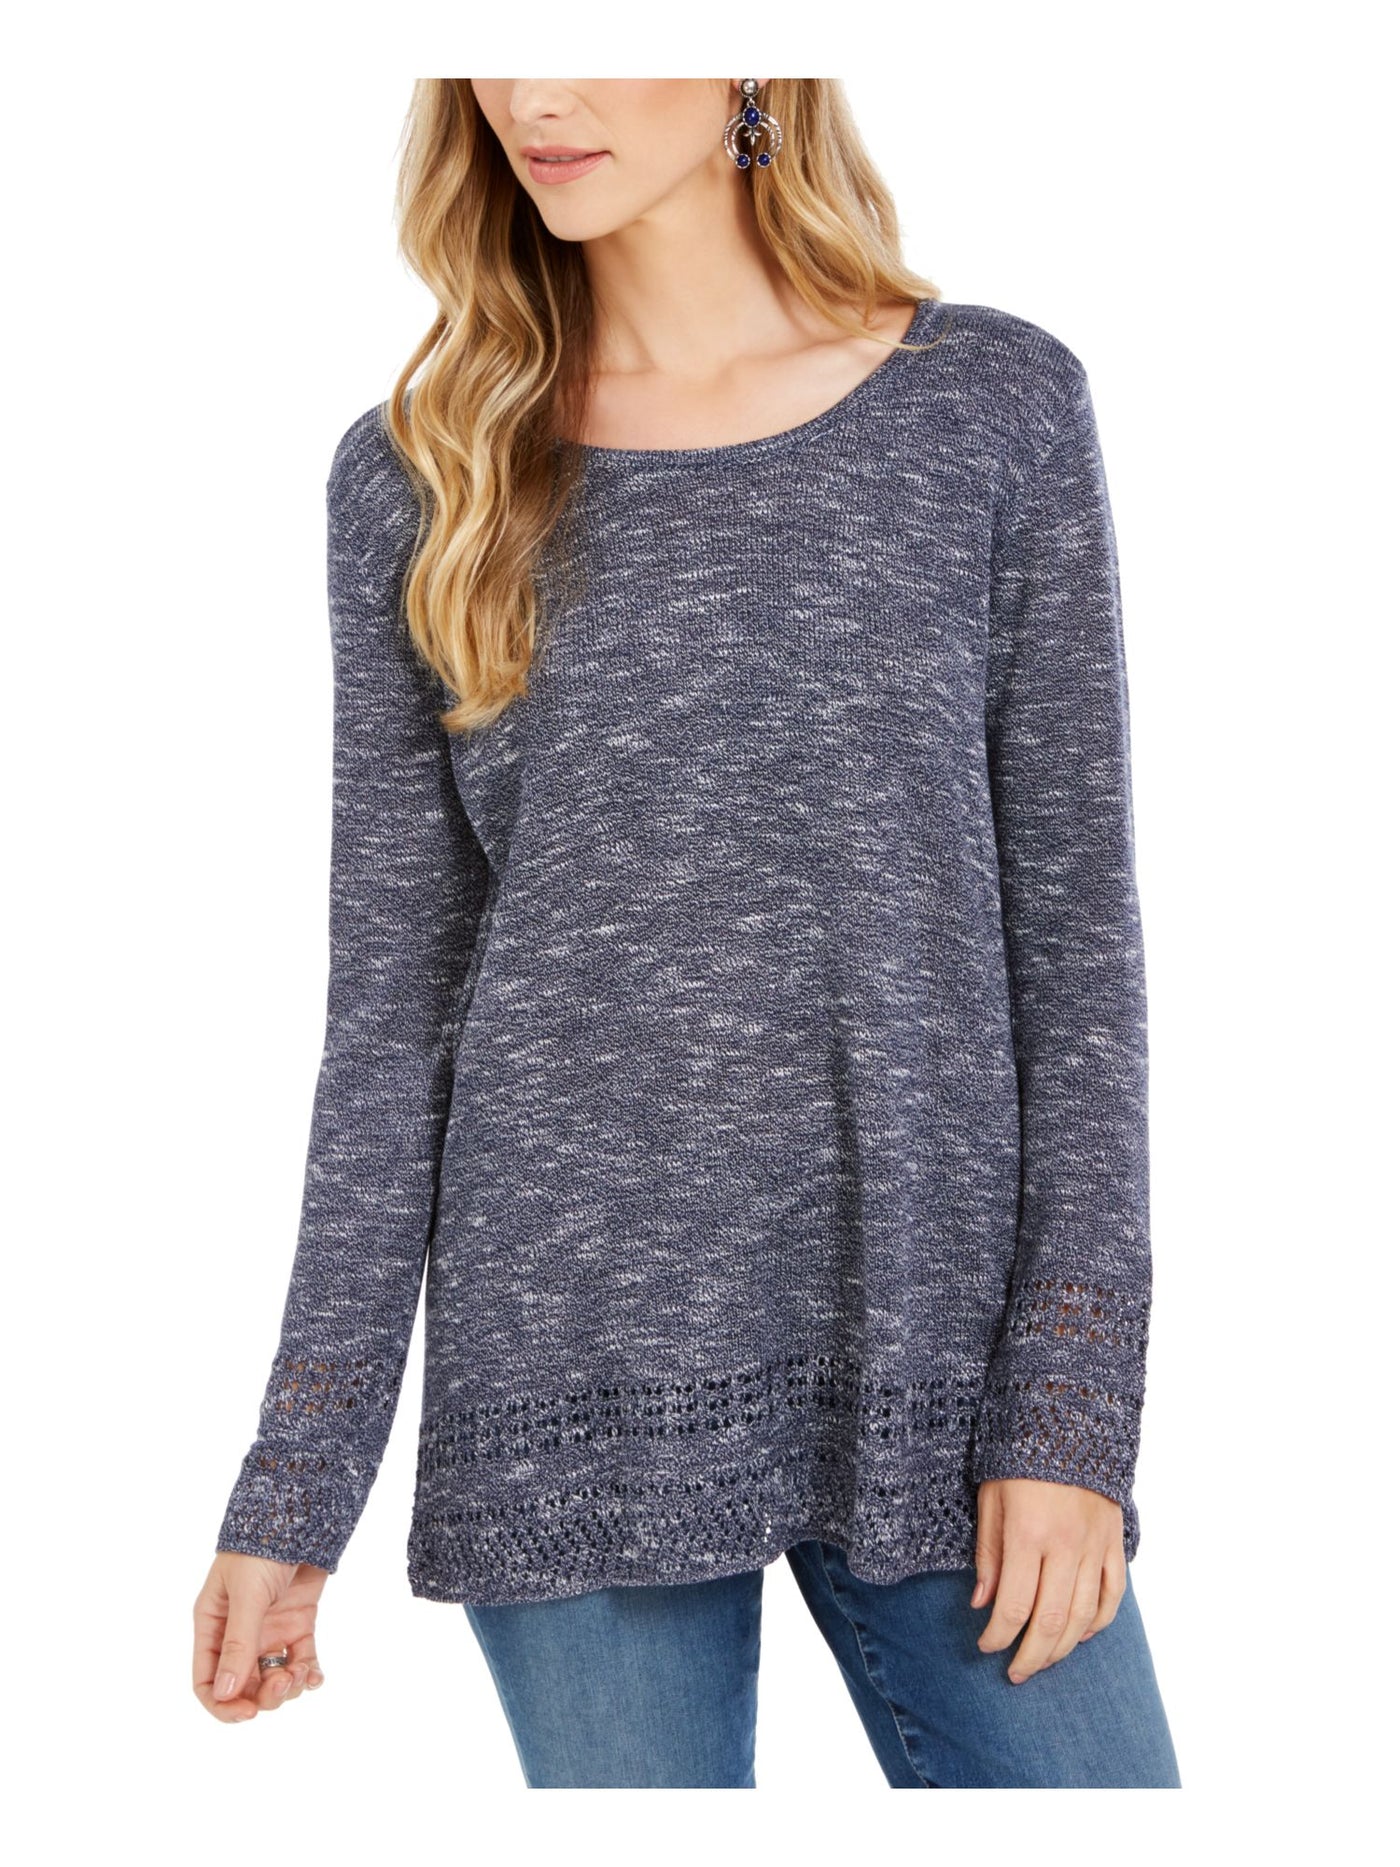 STYLE & COMPANY Womens Navy Textured Long Sleeve Jewel Neck Sweater Petites PM